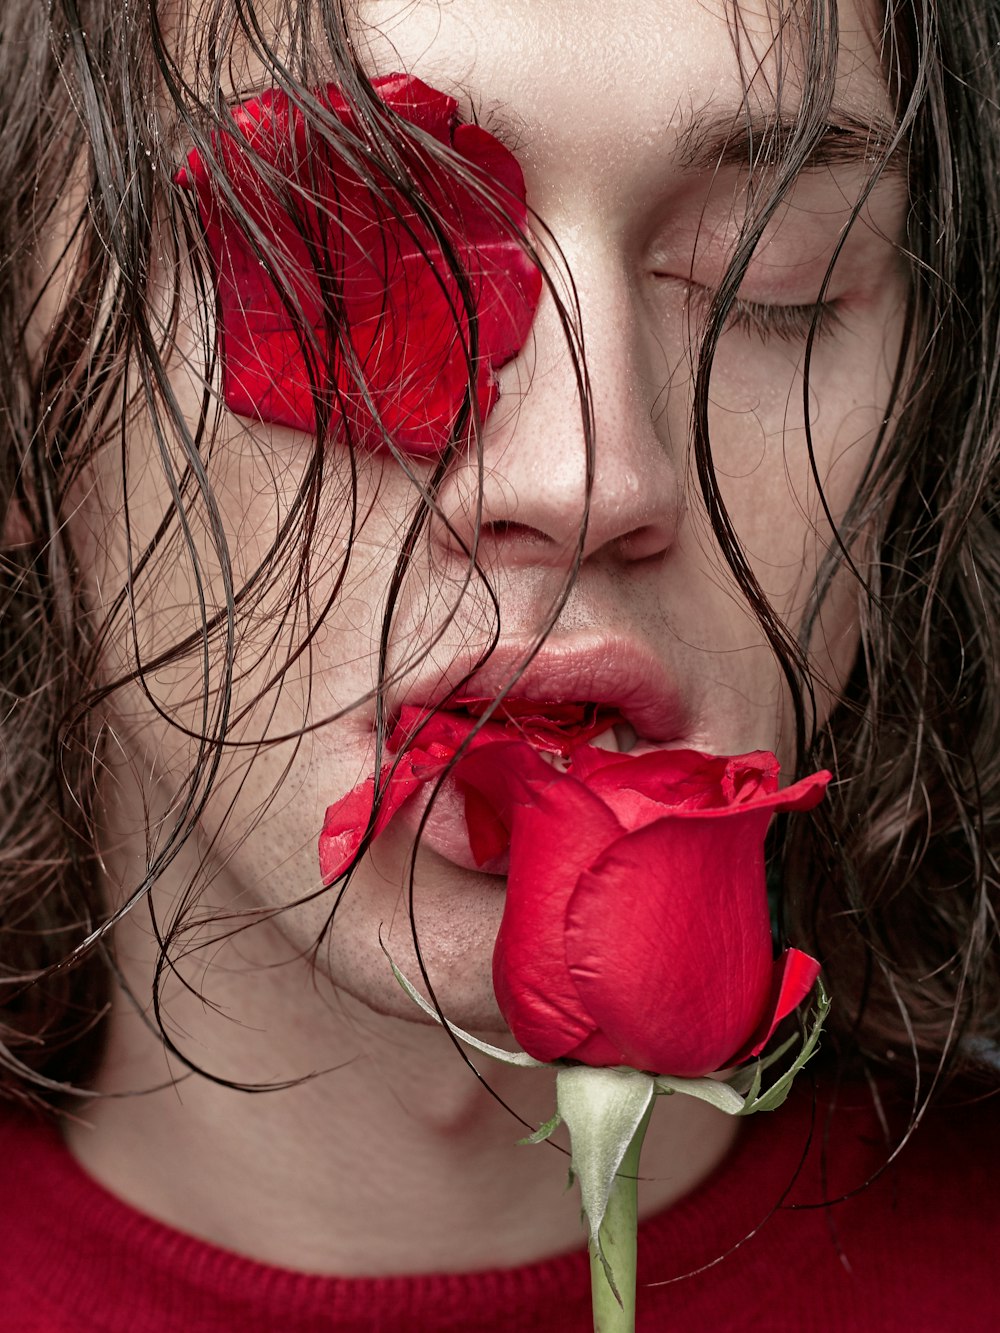 unknown person biting red rose flower